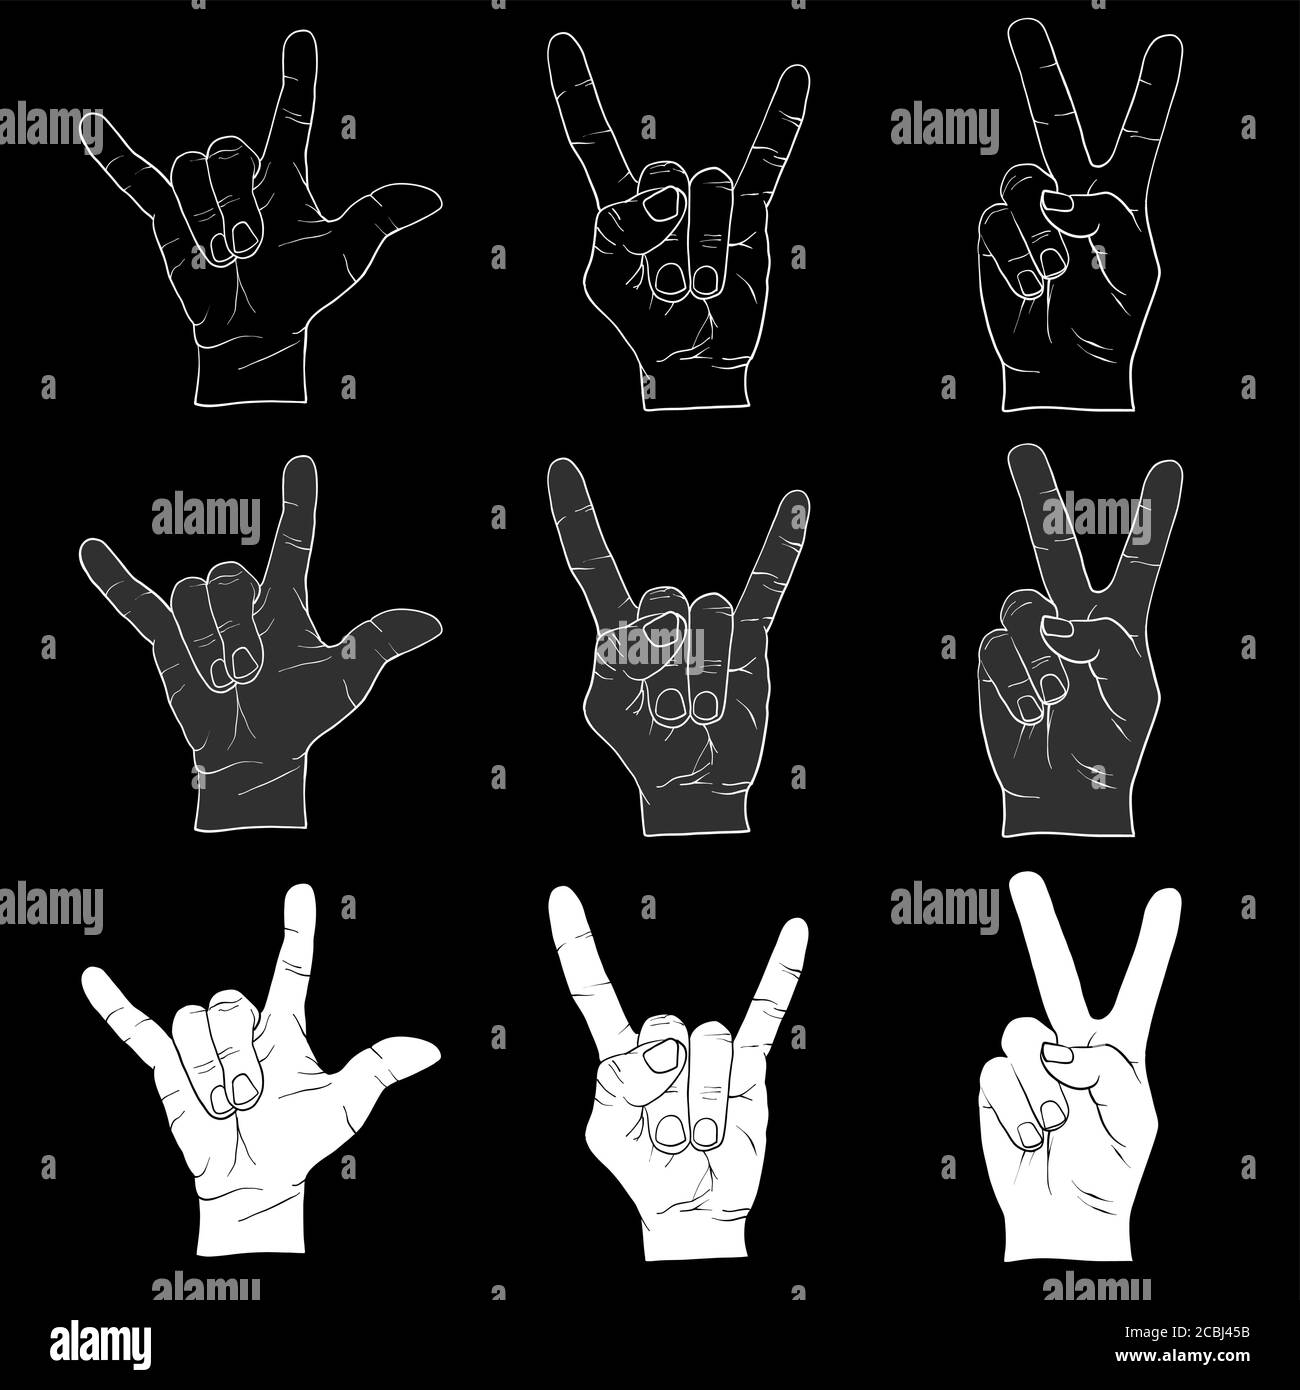 Three finger sign studies. Black and white hand drawn illustration. Icon sign for print and labelling. Stock Vector